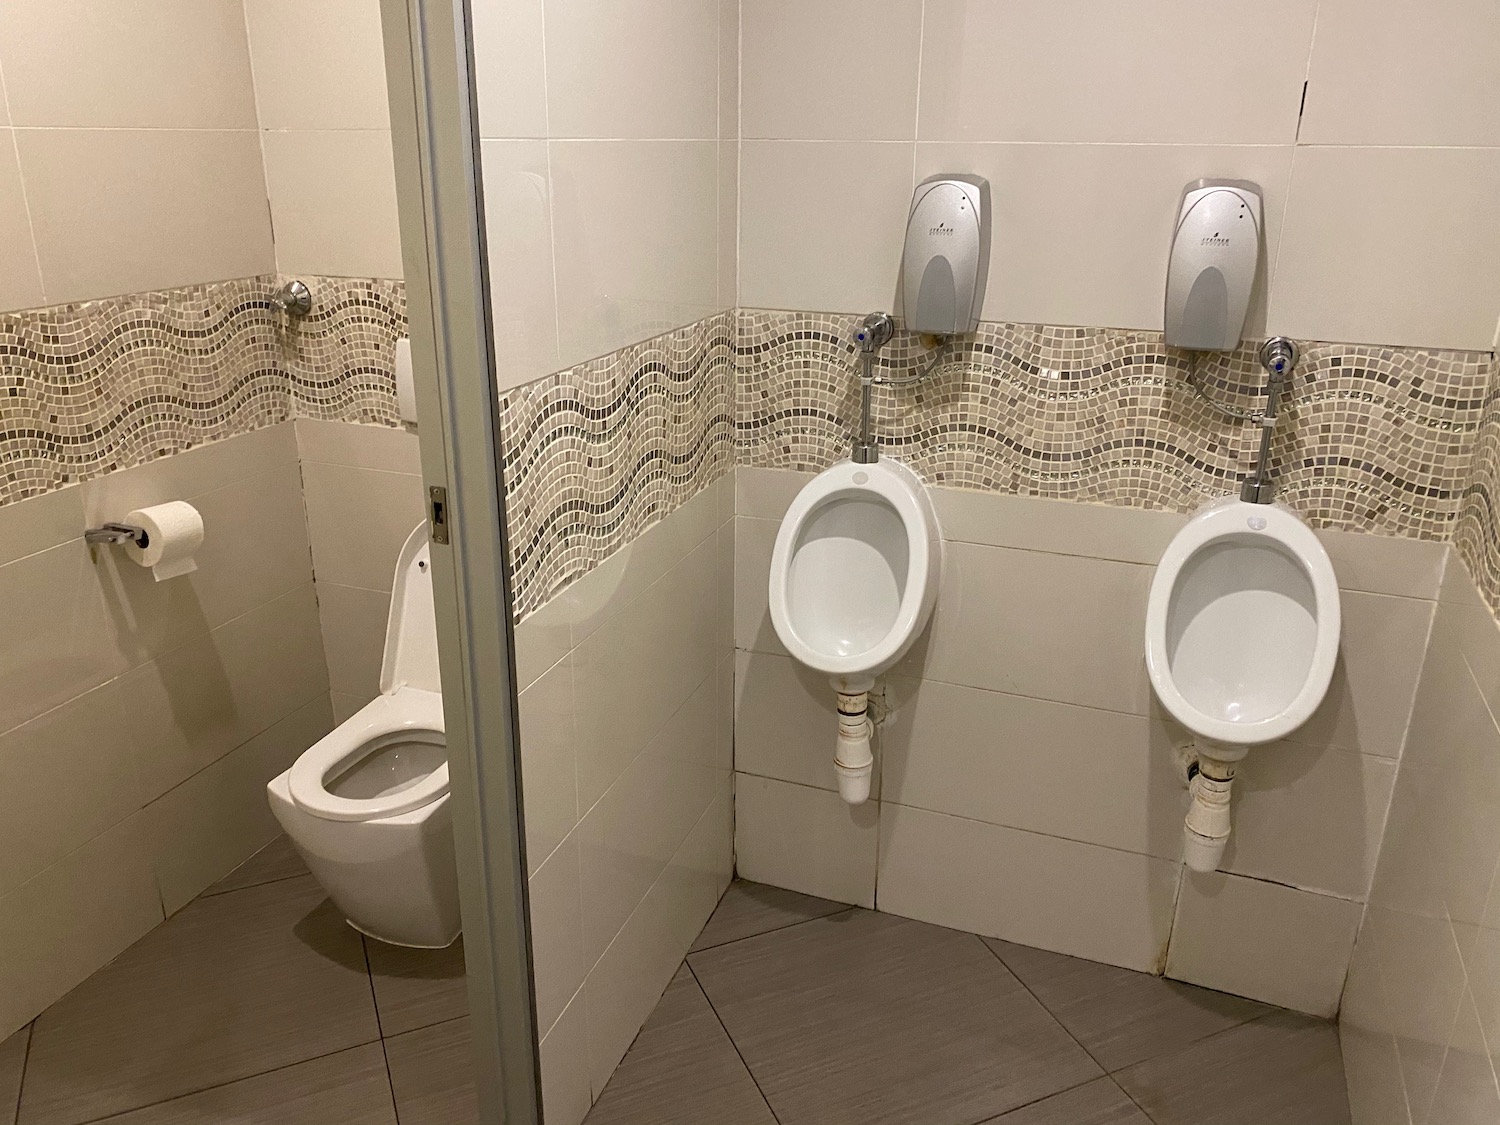 a bathroom with urinals and a glass door